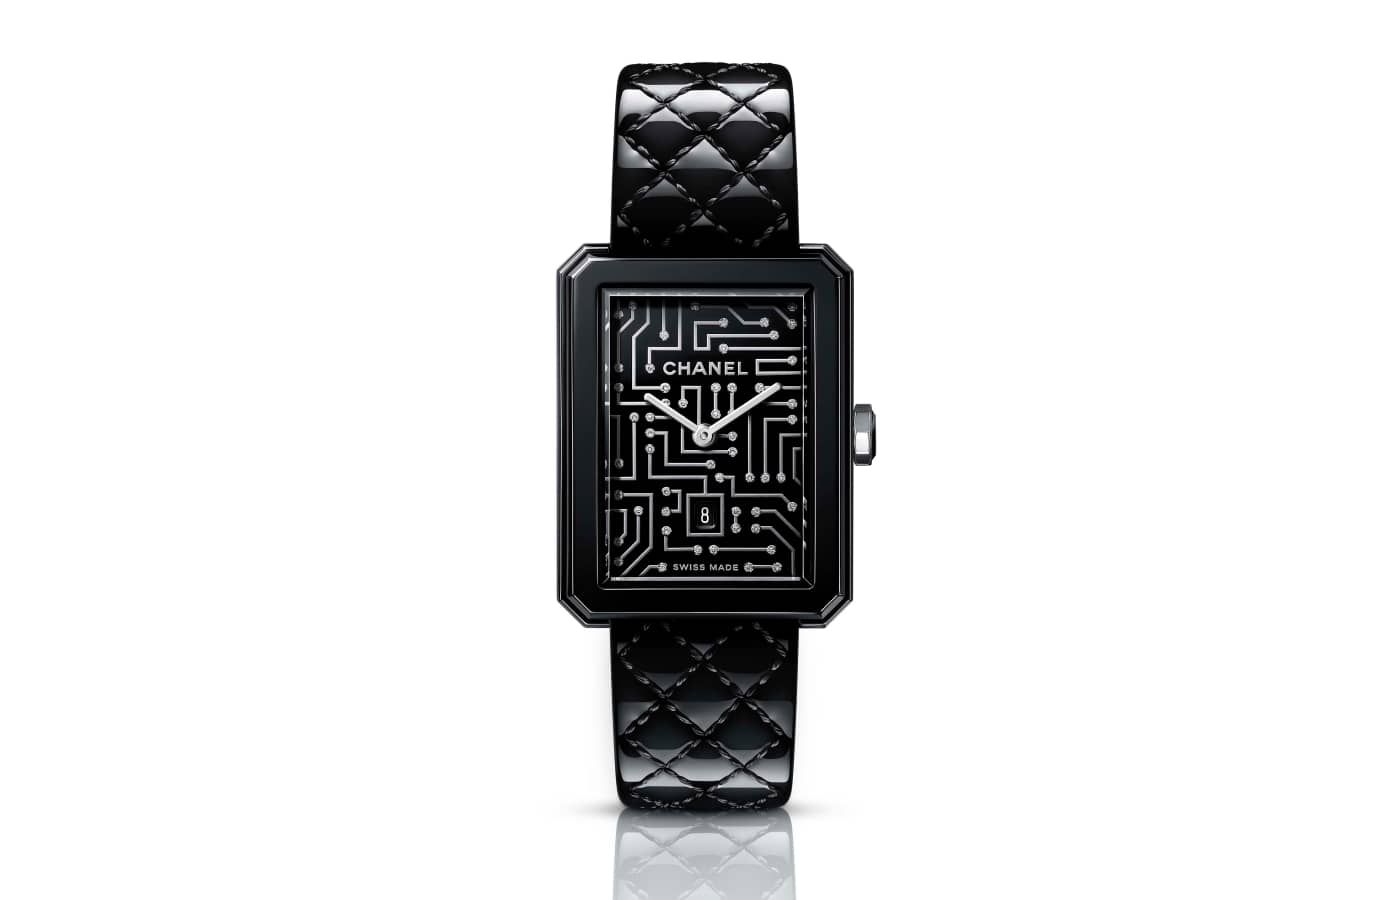 Chanel Boyfriend Cyberdata Watch featuring a printed circuit board set with diamonds on the dial, with a bracelet in black quilted patent leather with a silver-colored lining